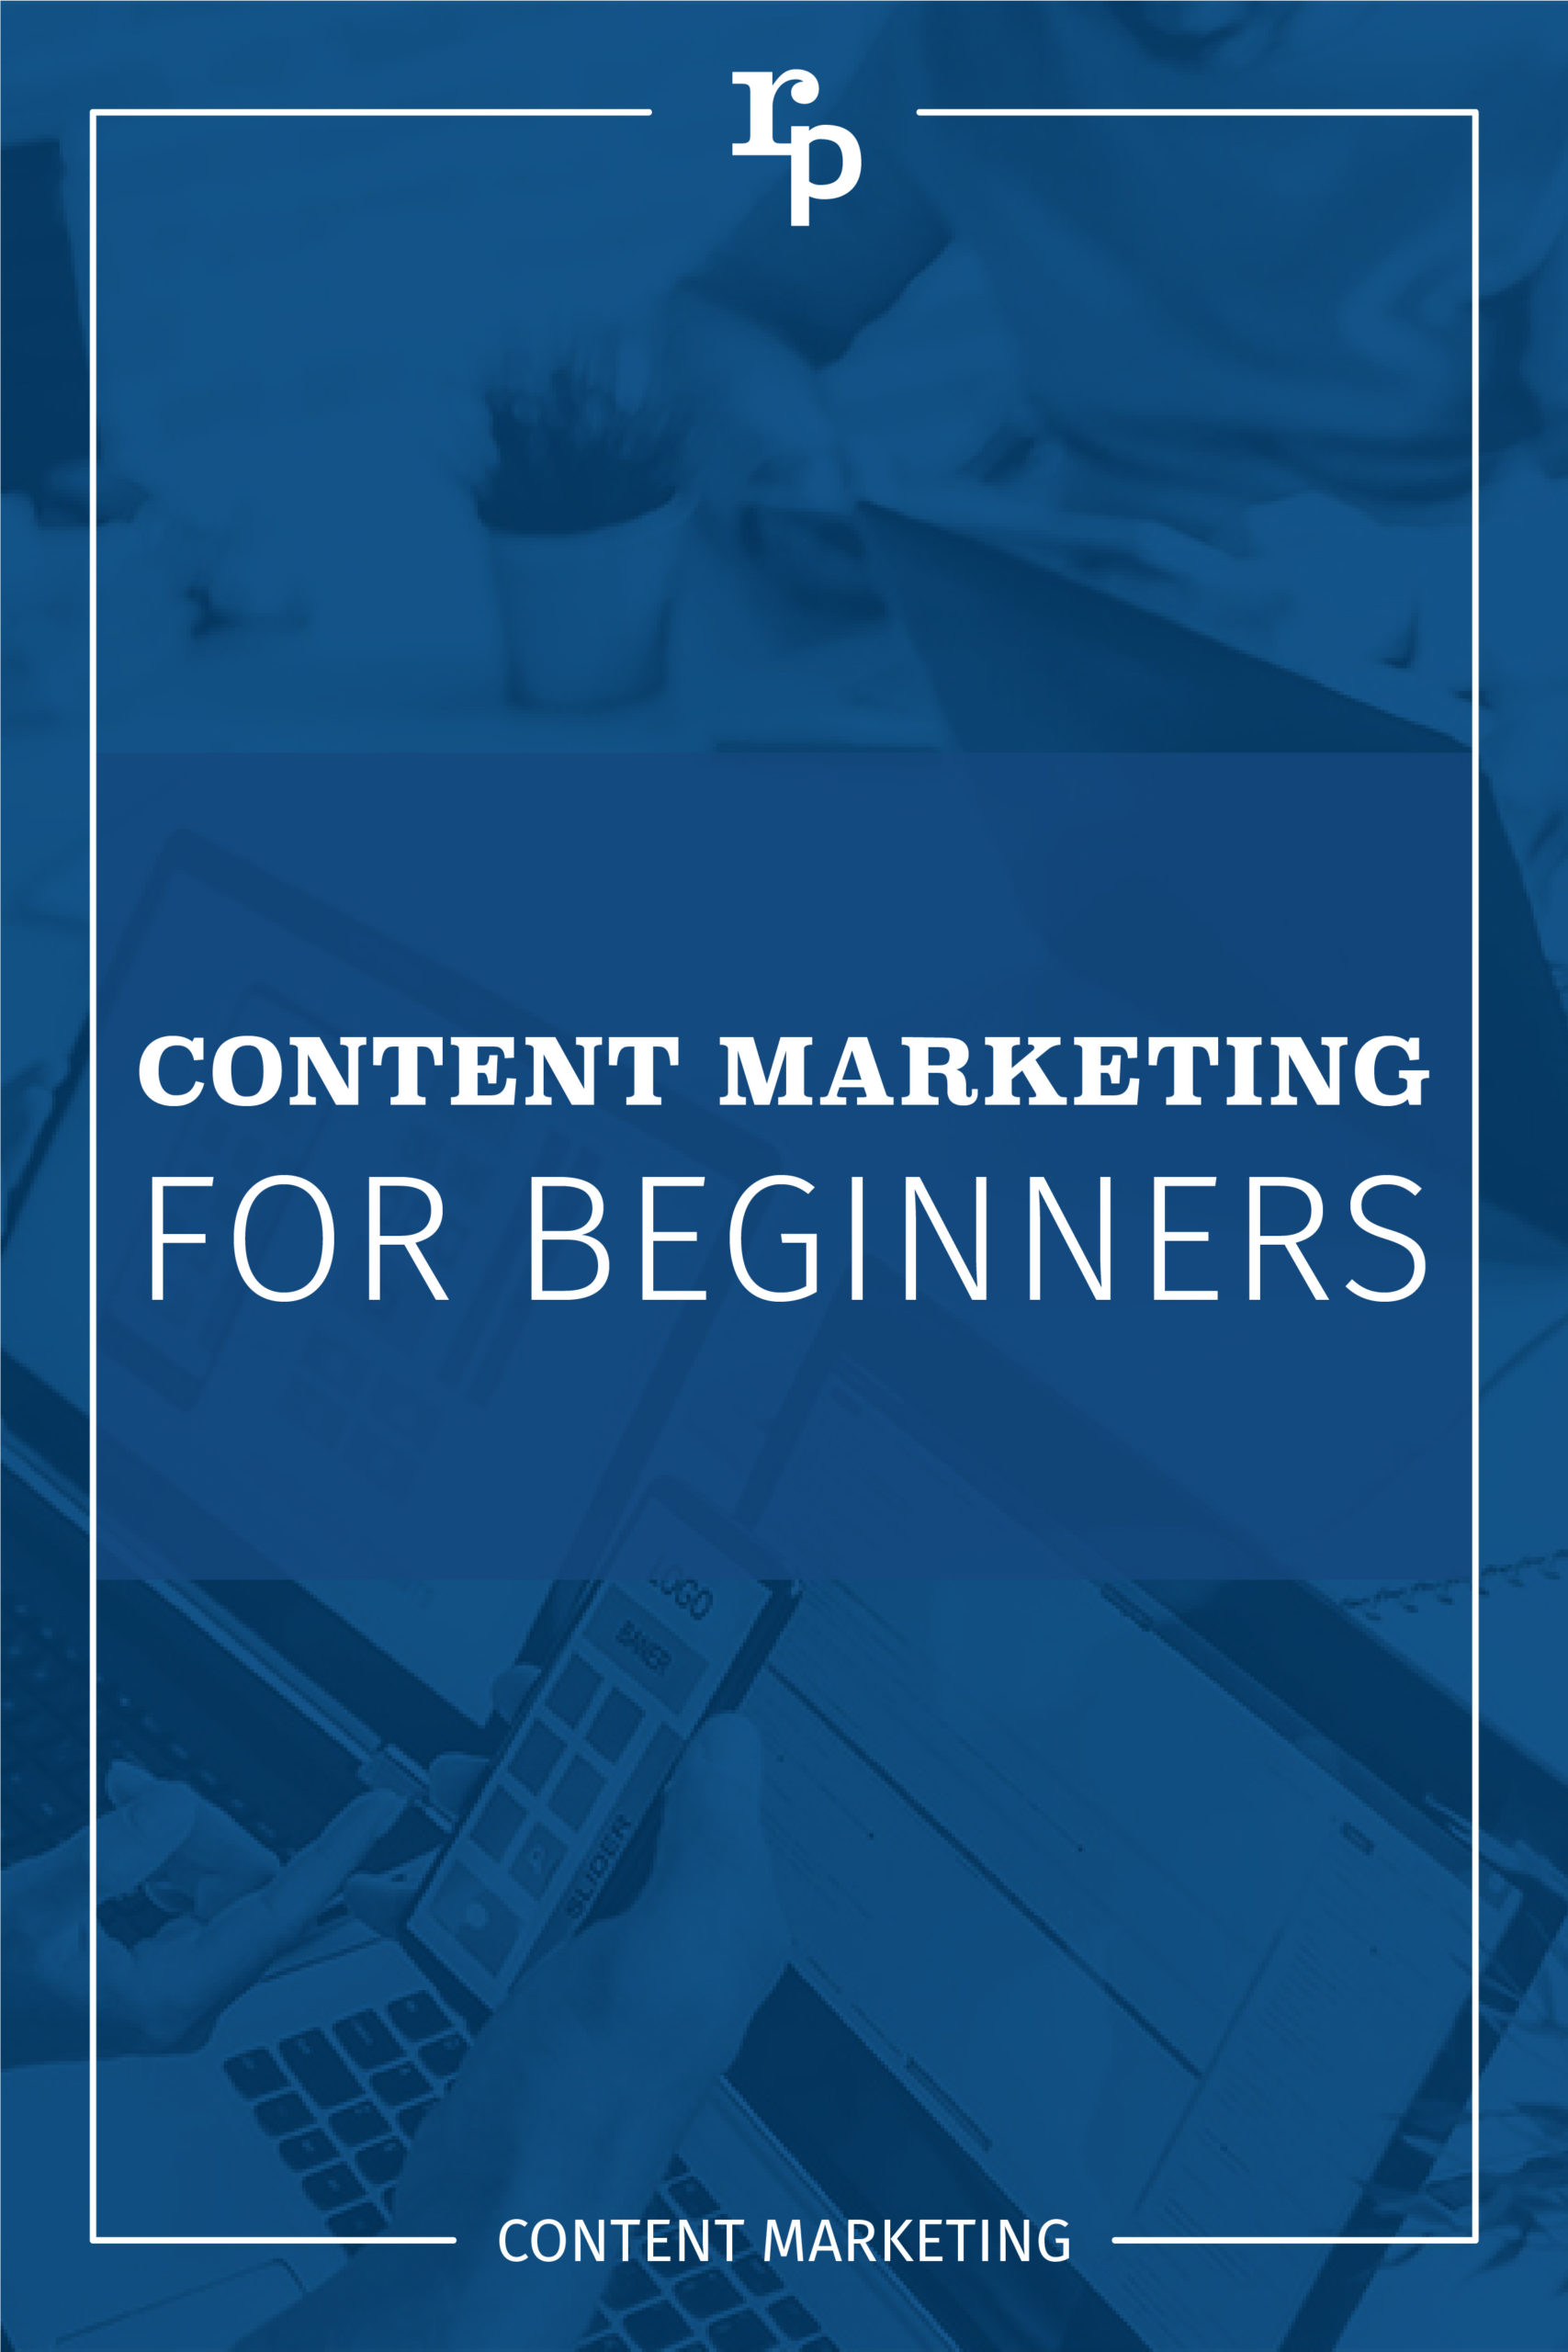 content marketing for beginners content1 pin blue scaled